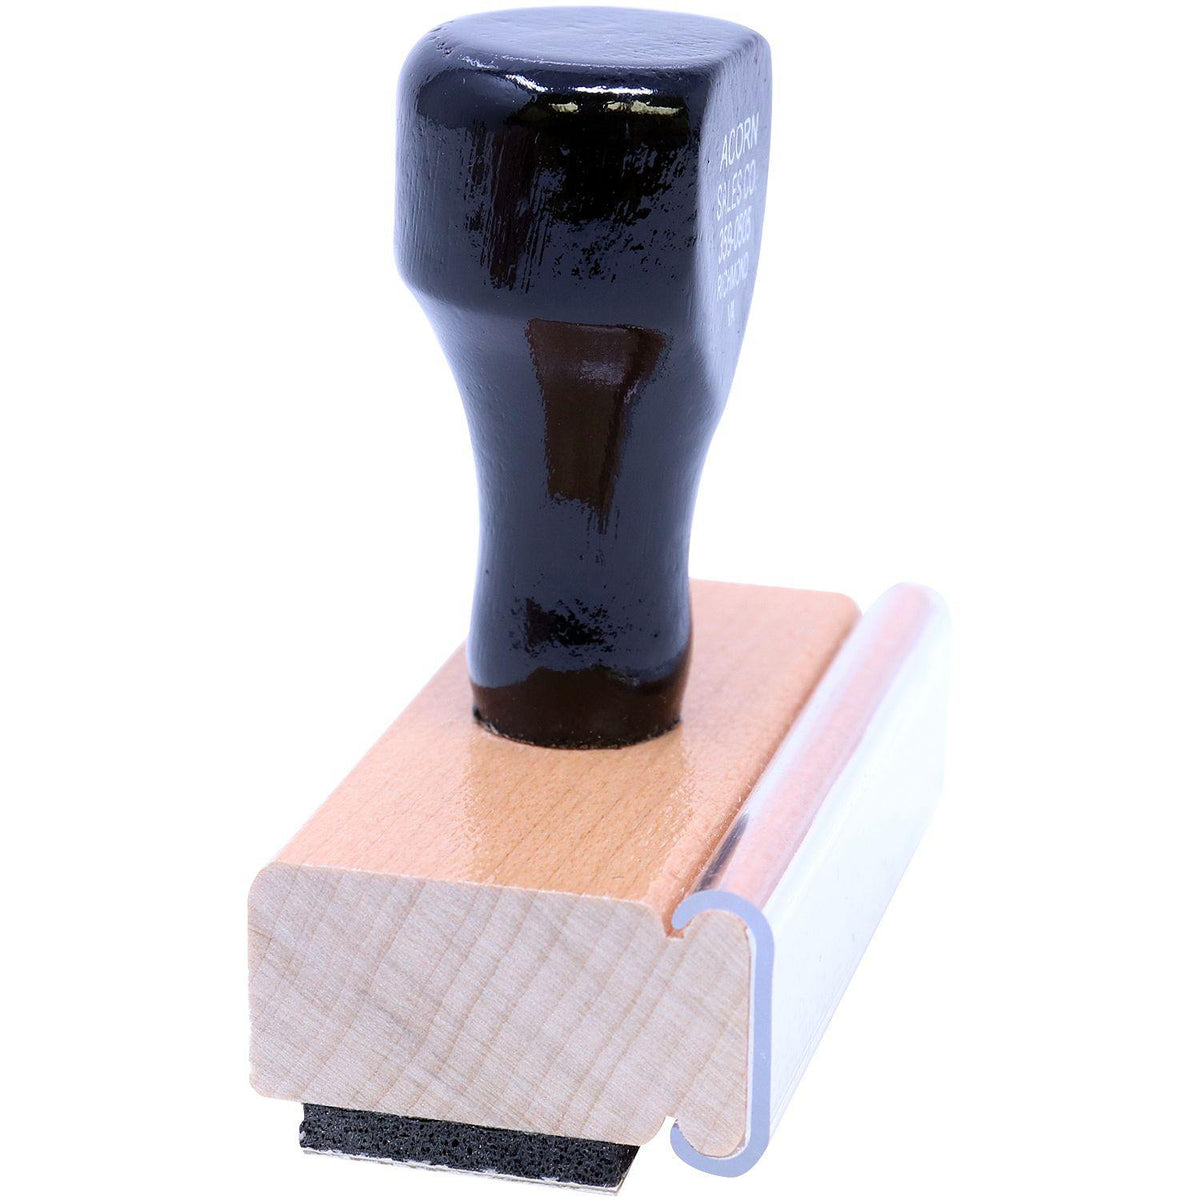 Side View of Large File Rubber Stamp at an Angle